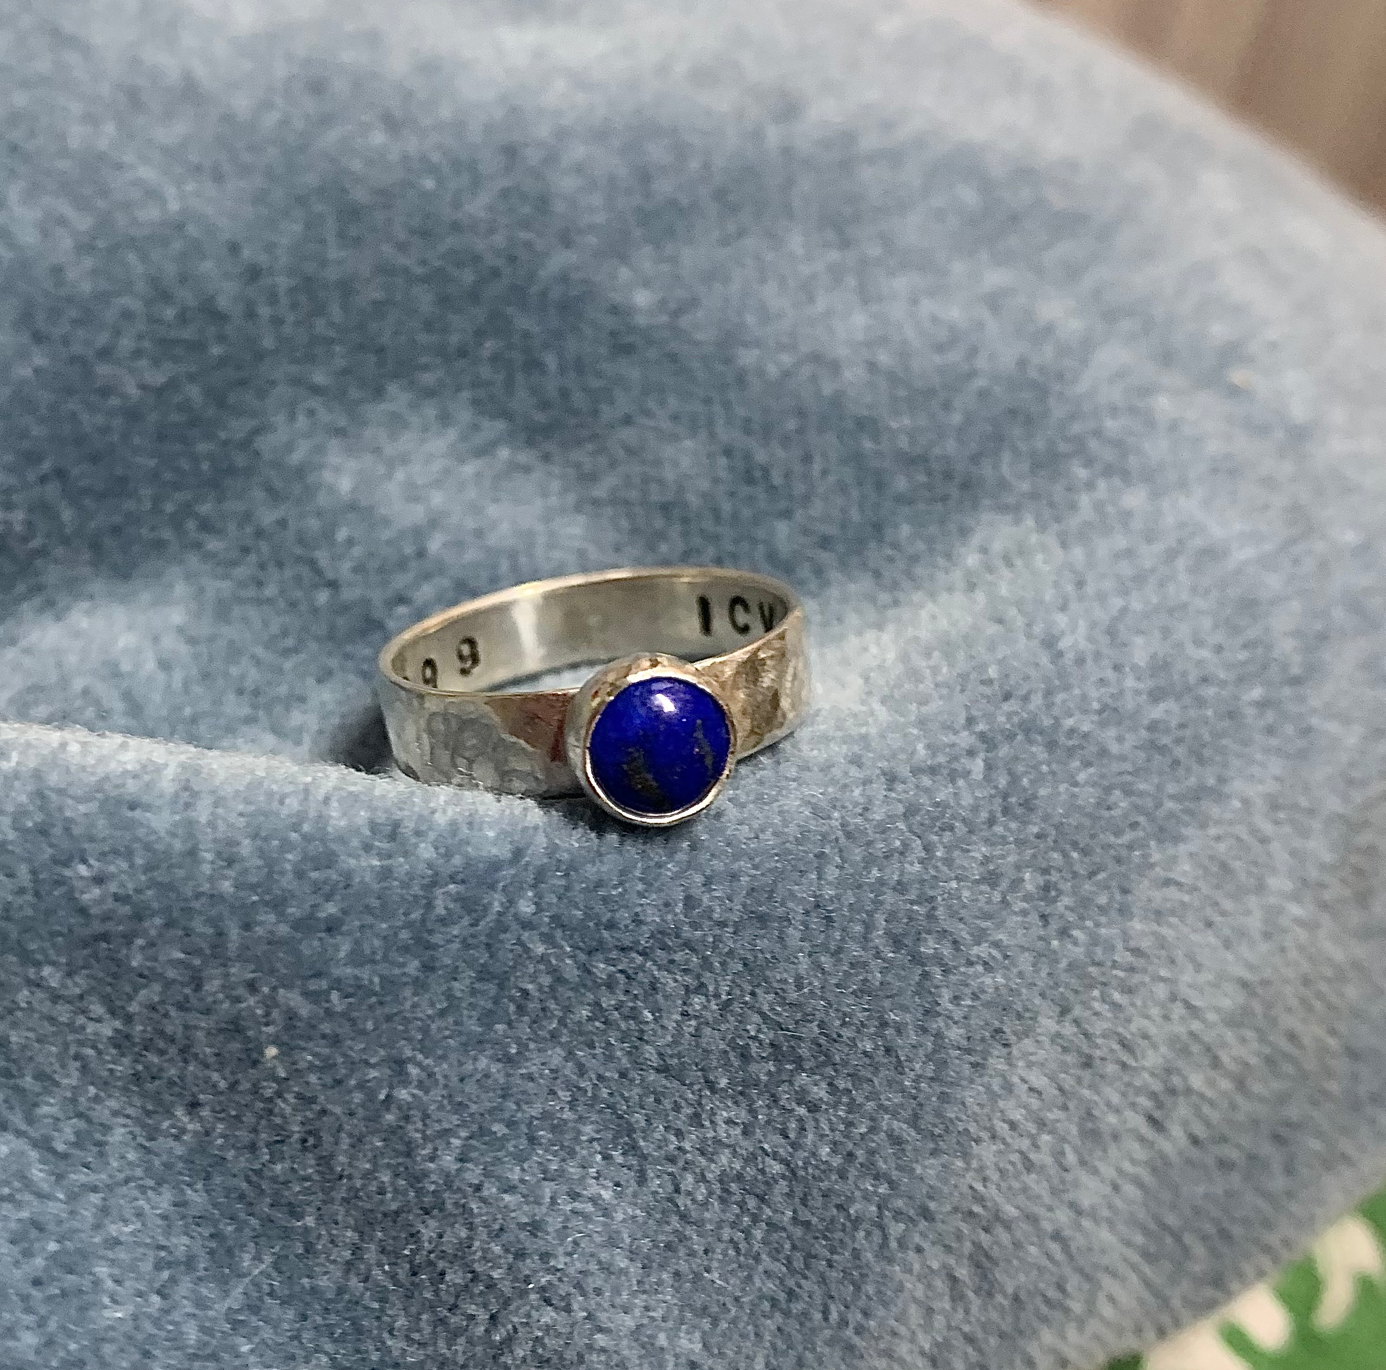 Small round gemstone ring with engraving